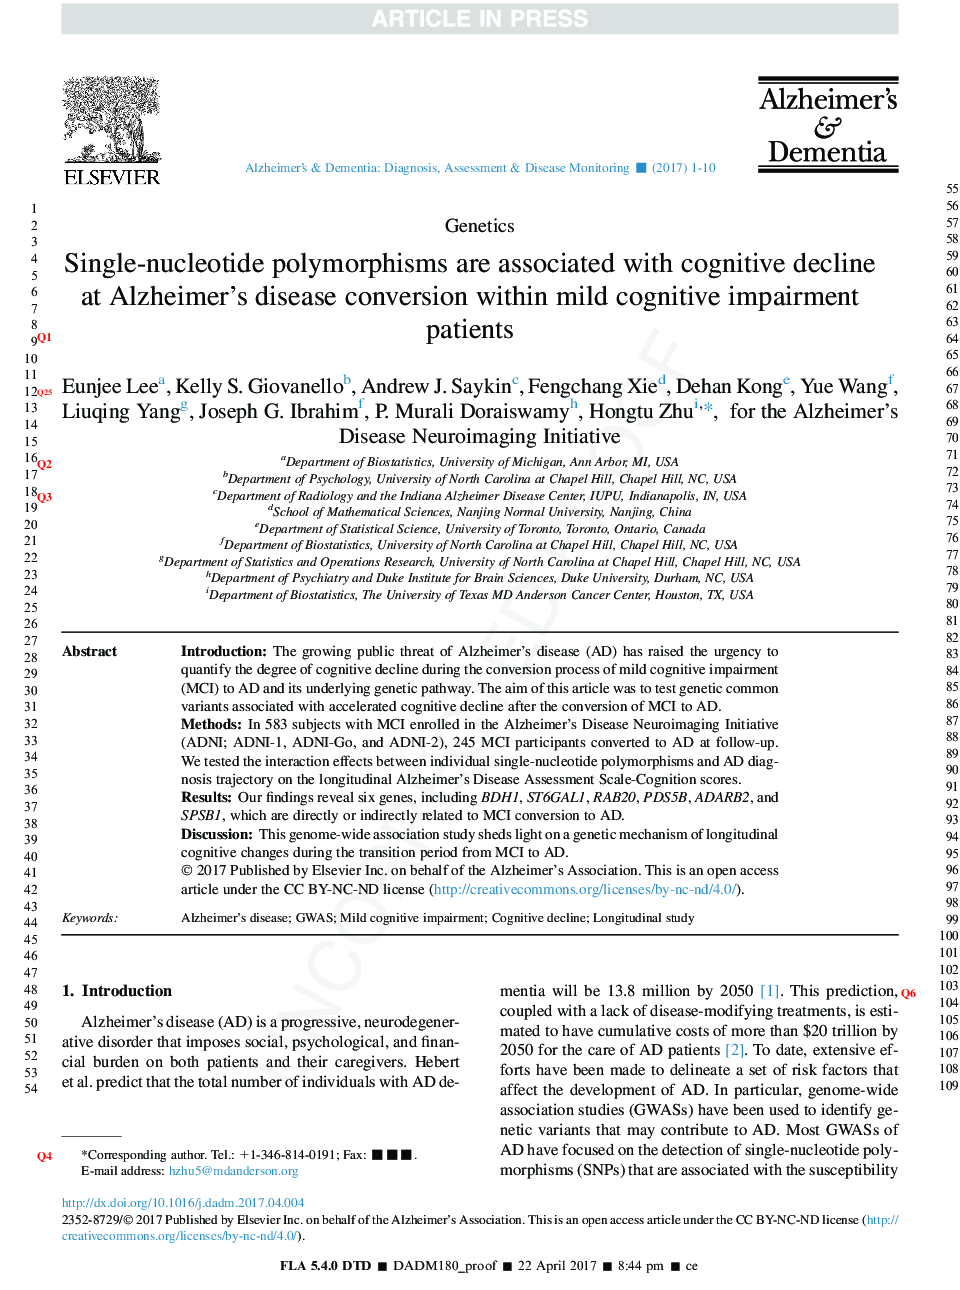 Single-nucleotide polymorphisms are associated with cognitive decline at Alzheimer's disease conversion within mild cognitive impairment patients